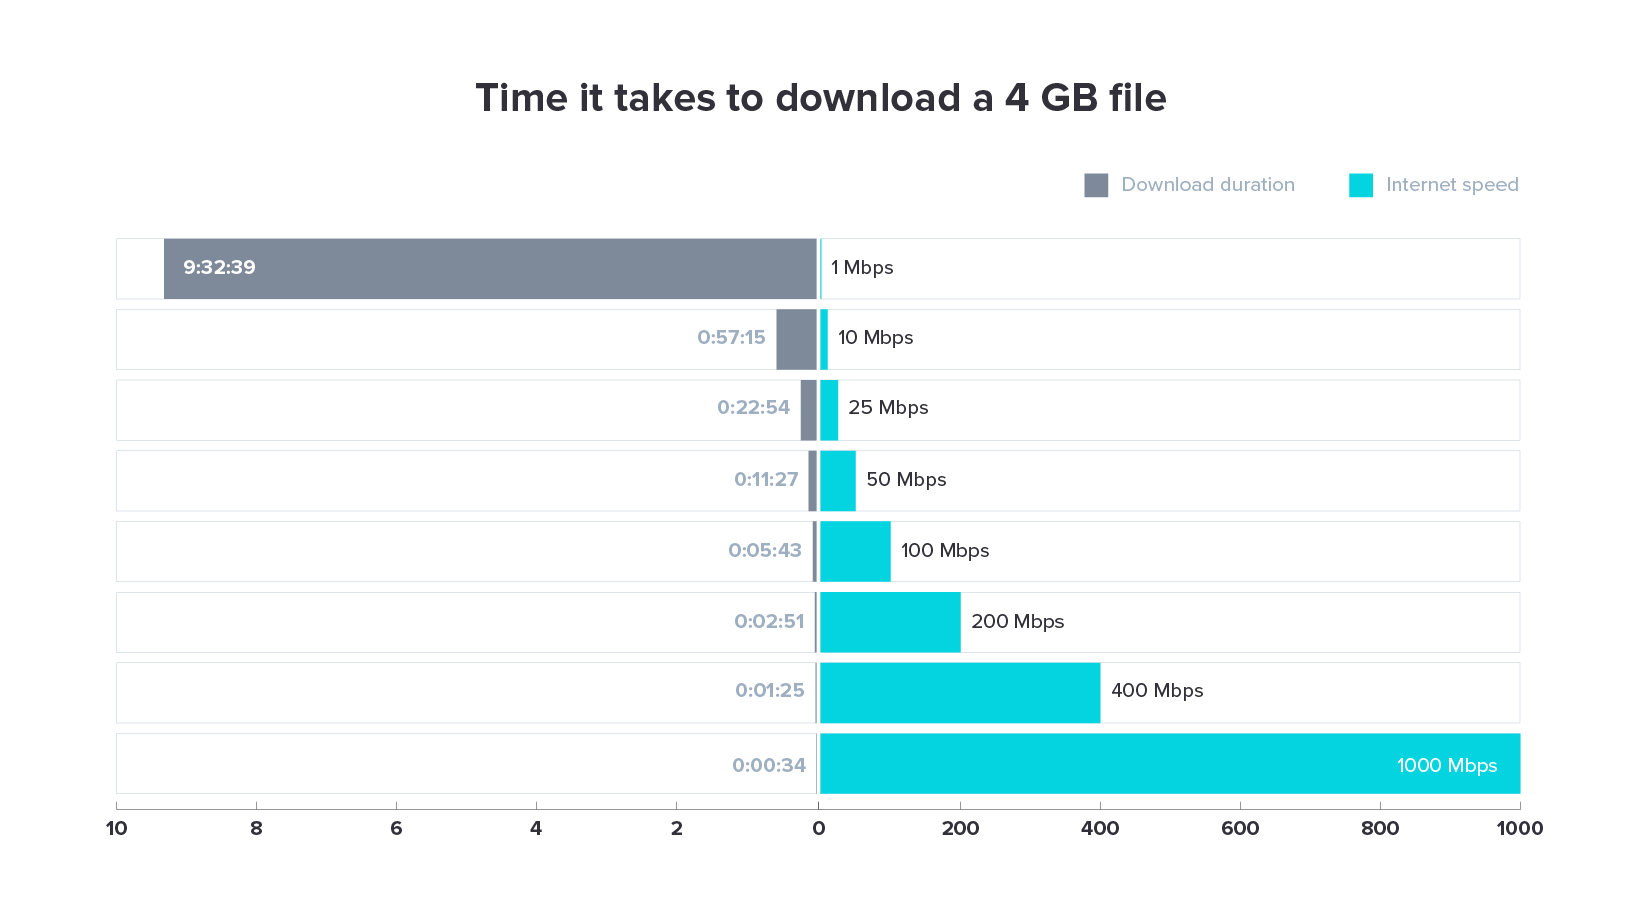 Comparison of movie download times at different internet speed tiers